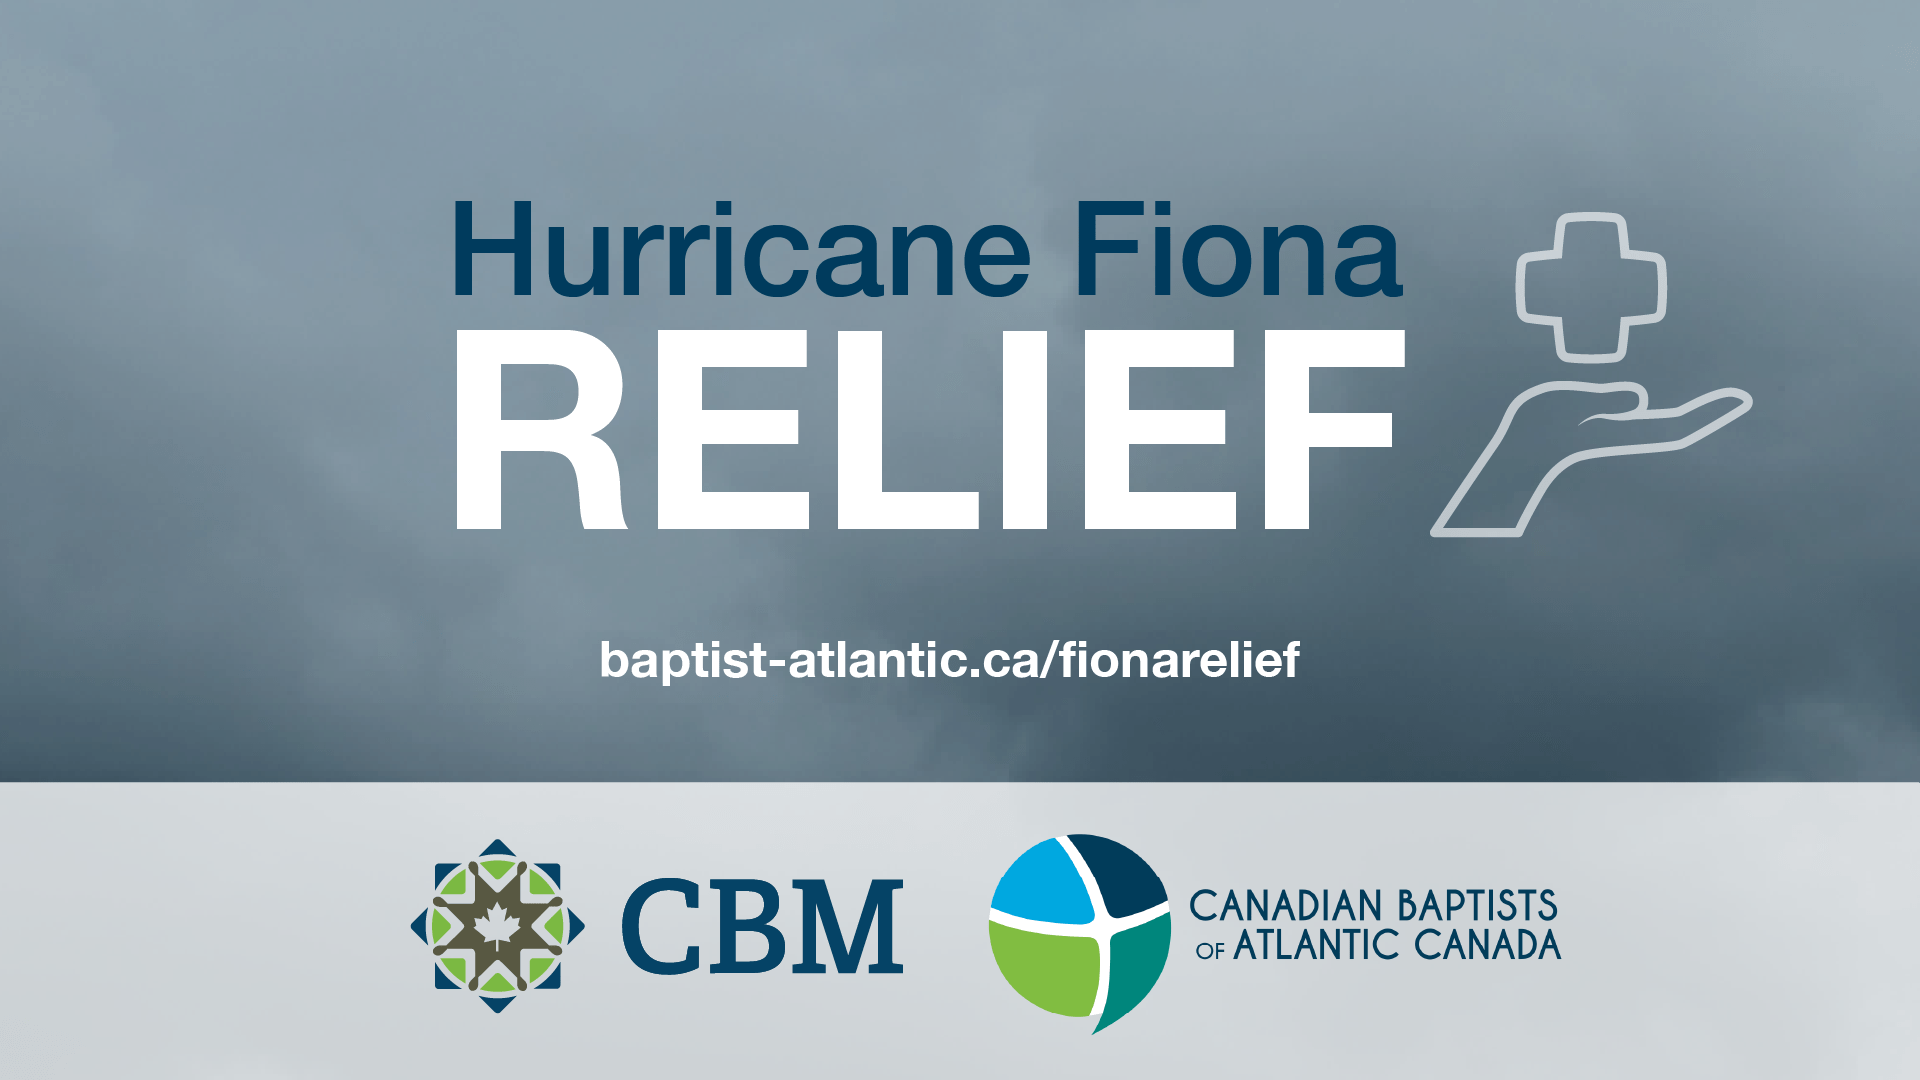 An Update on our Hurricane Fiona Relief Fund